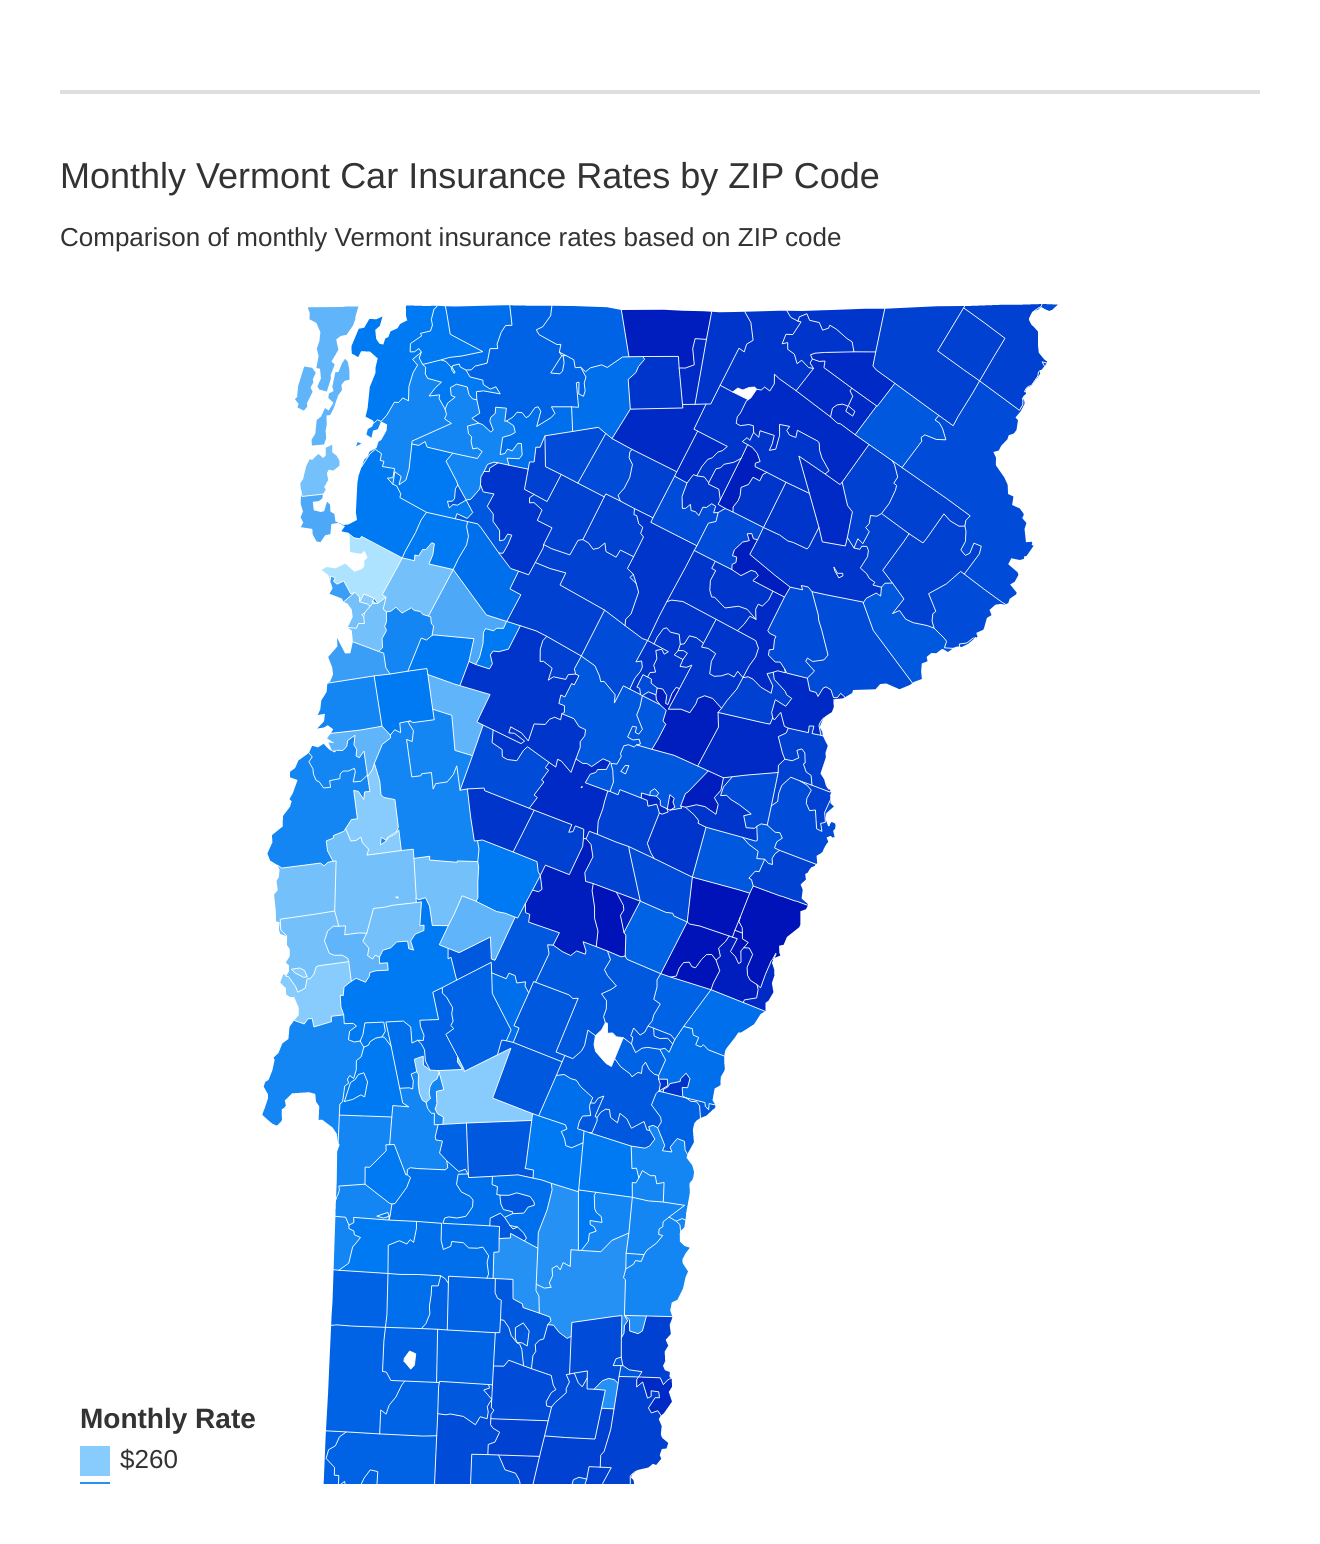 Monthly Vermont Car Insurance Rates by ZIP Code